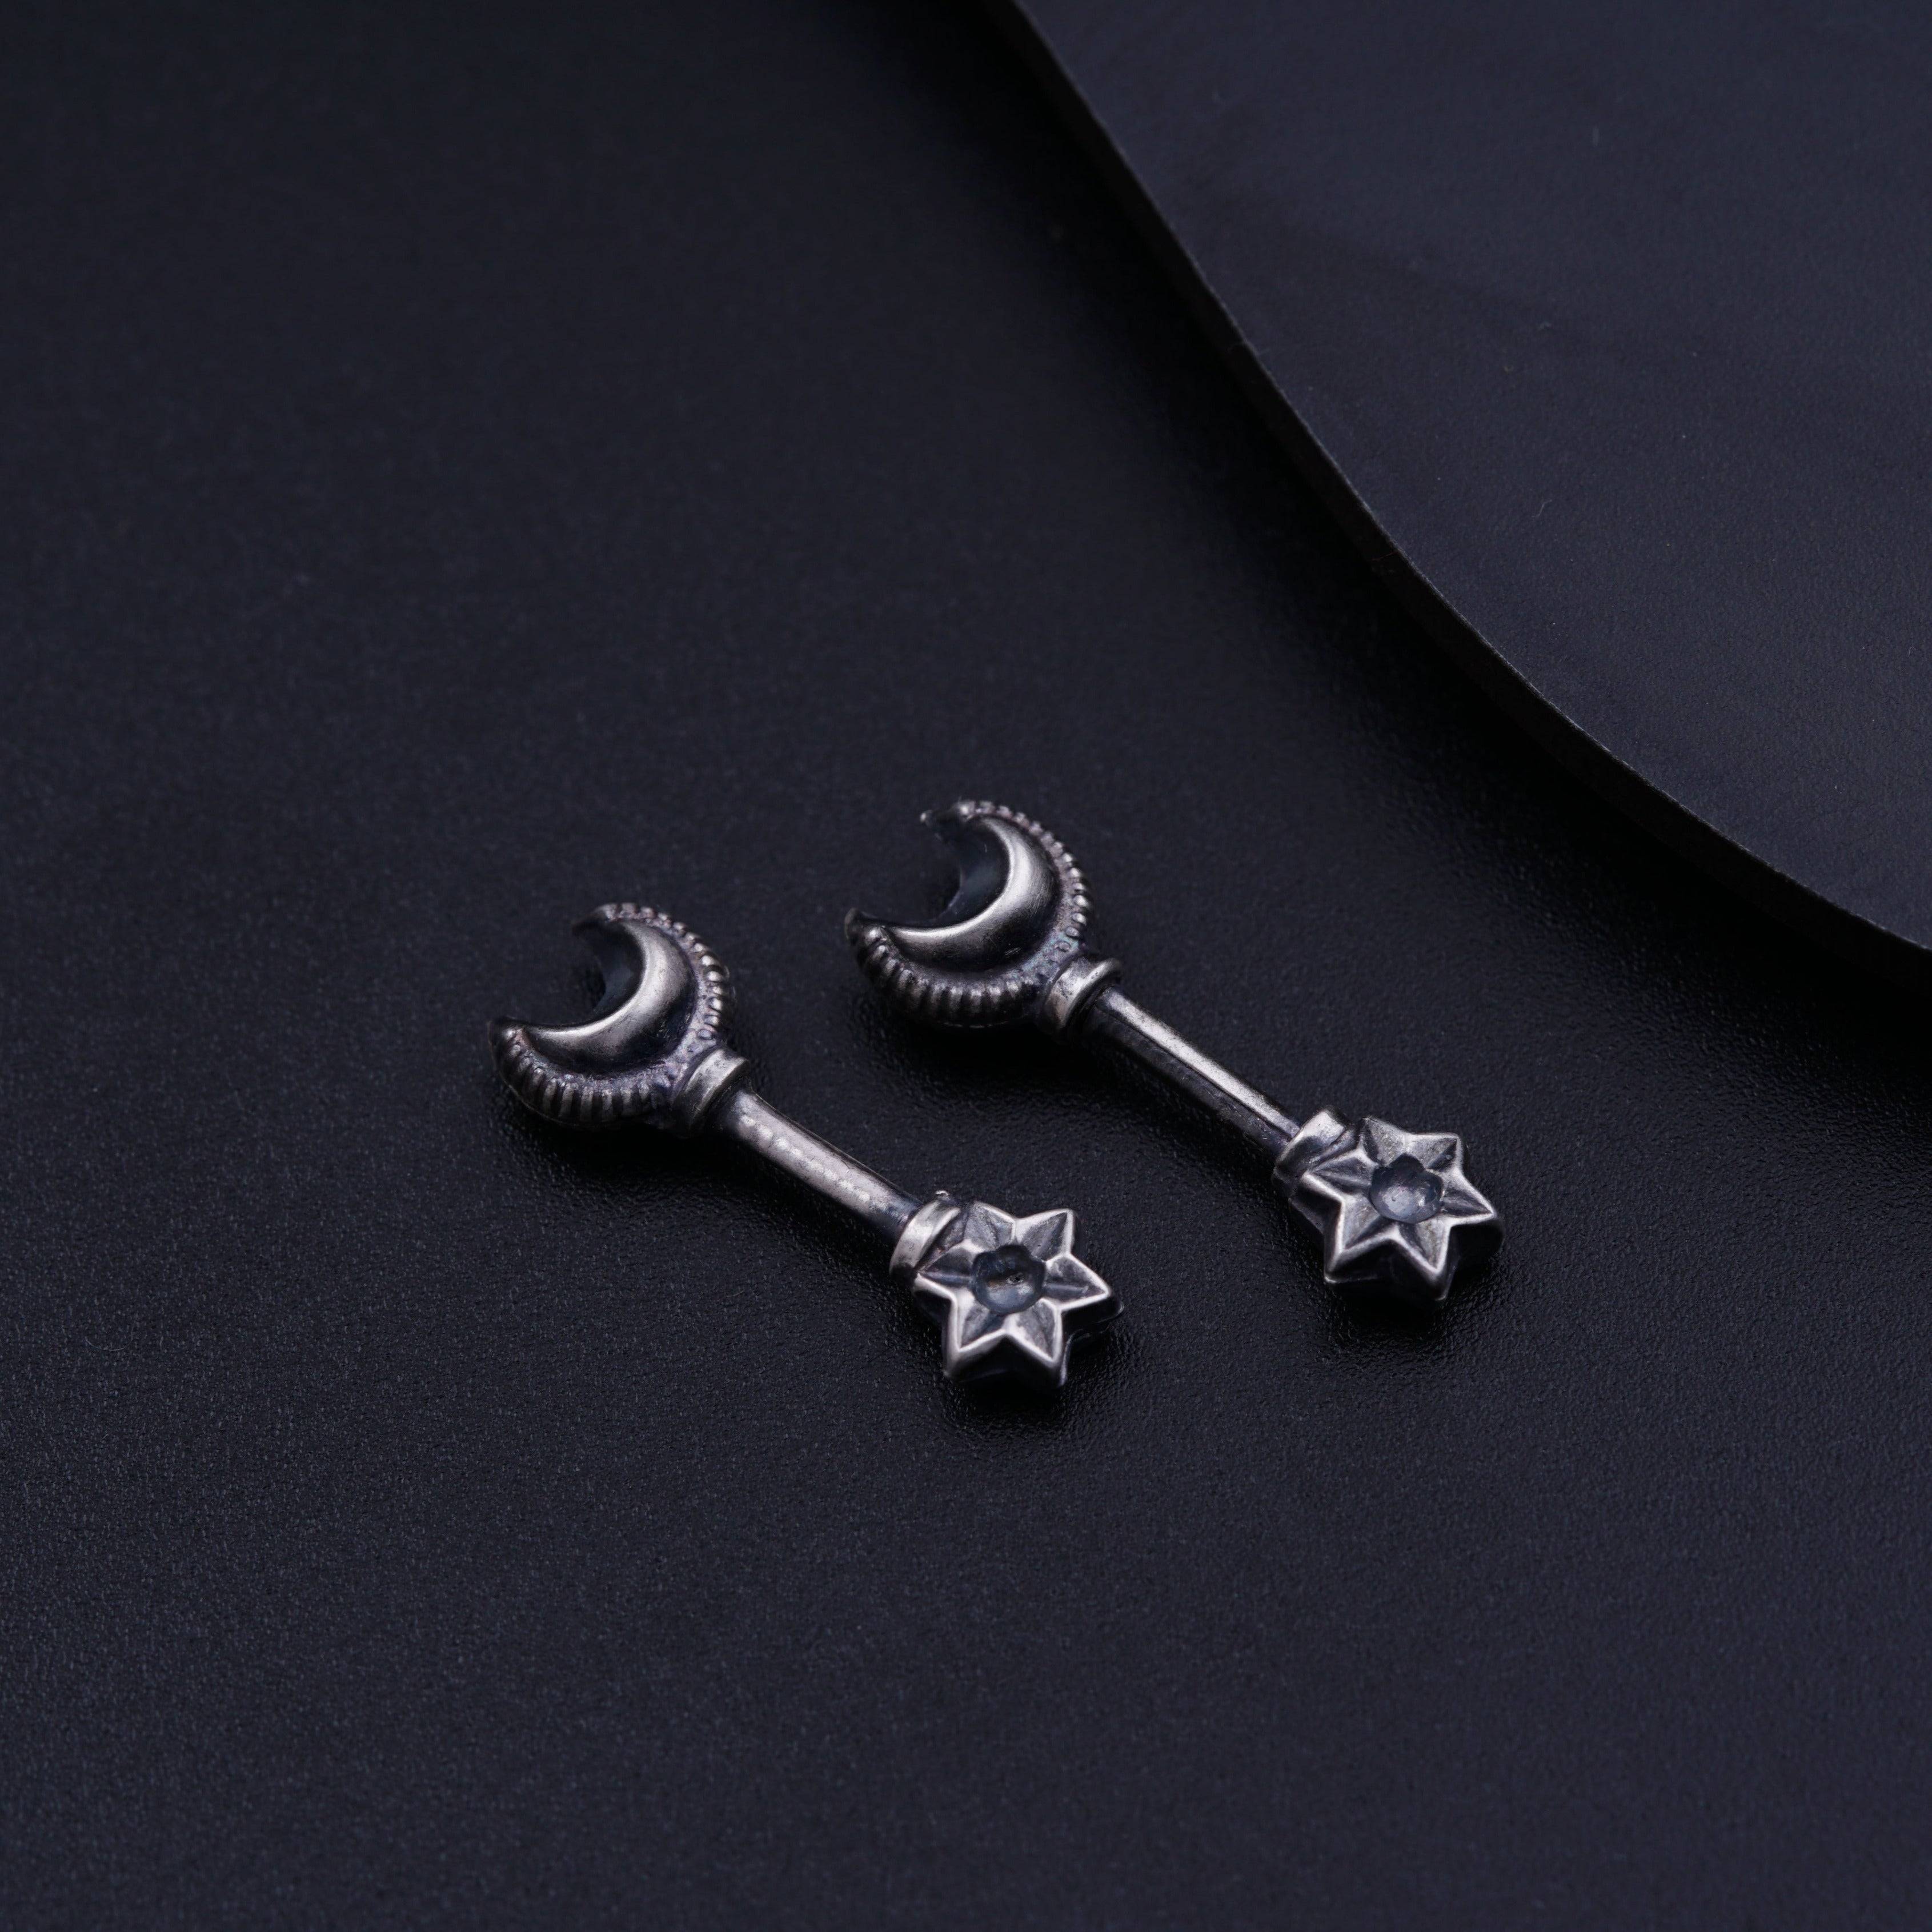 a pair of star and moon earrings on a black surface